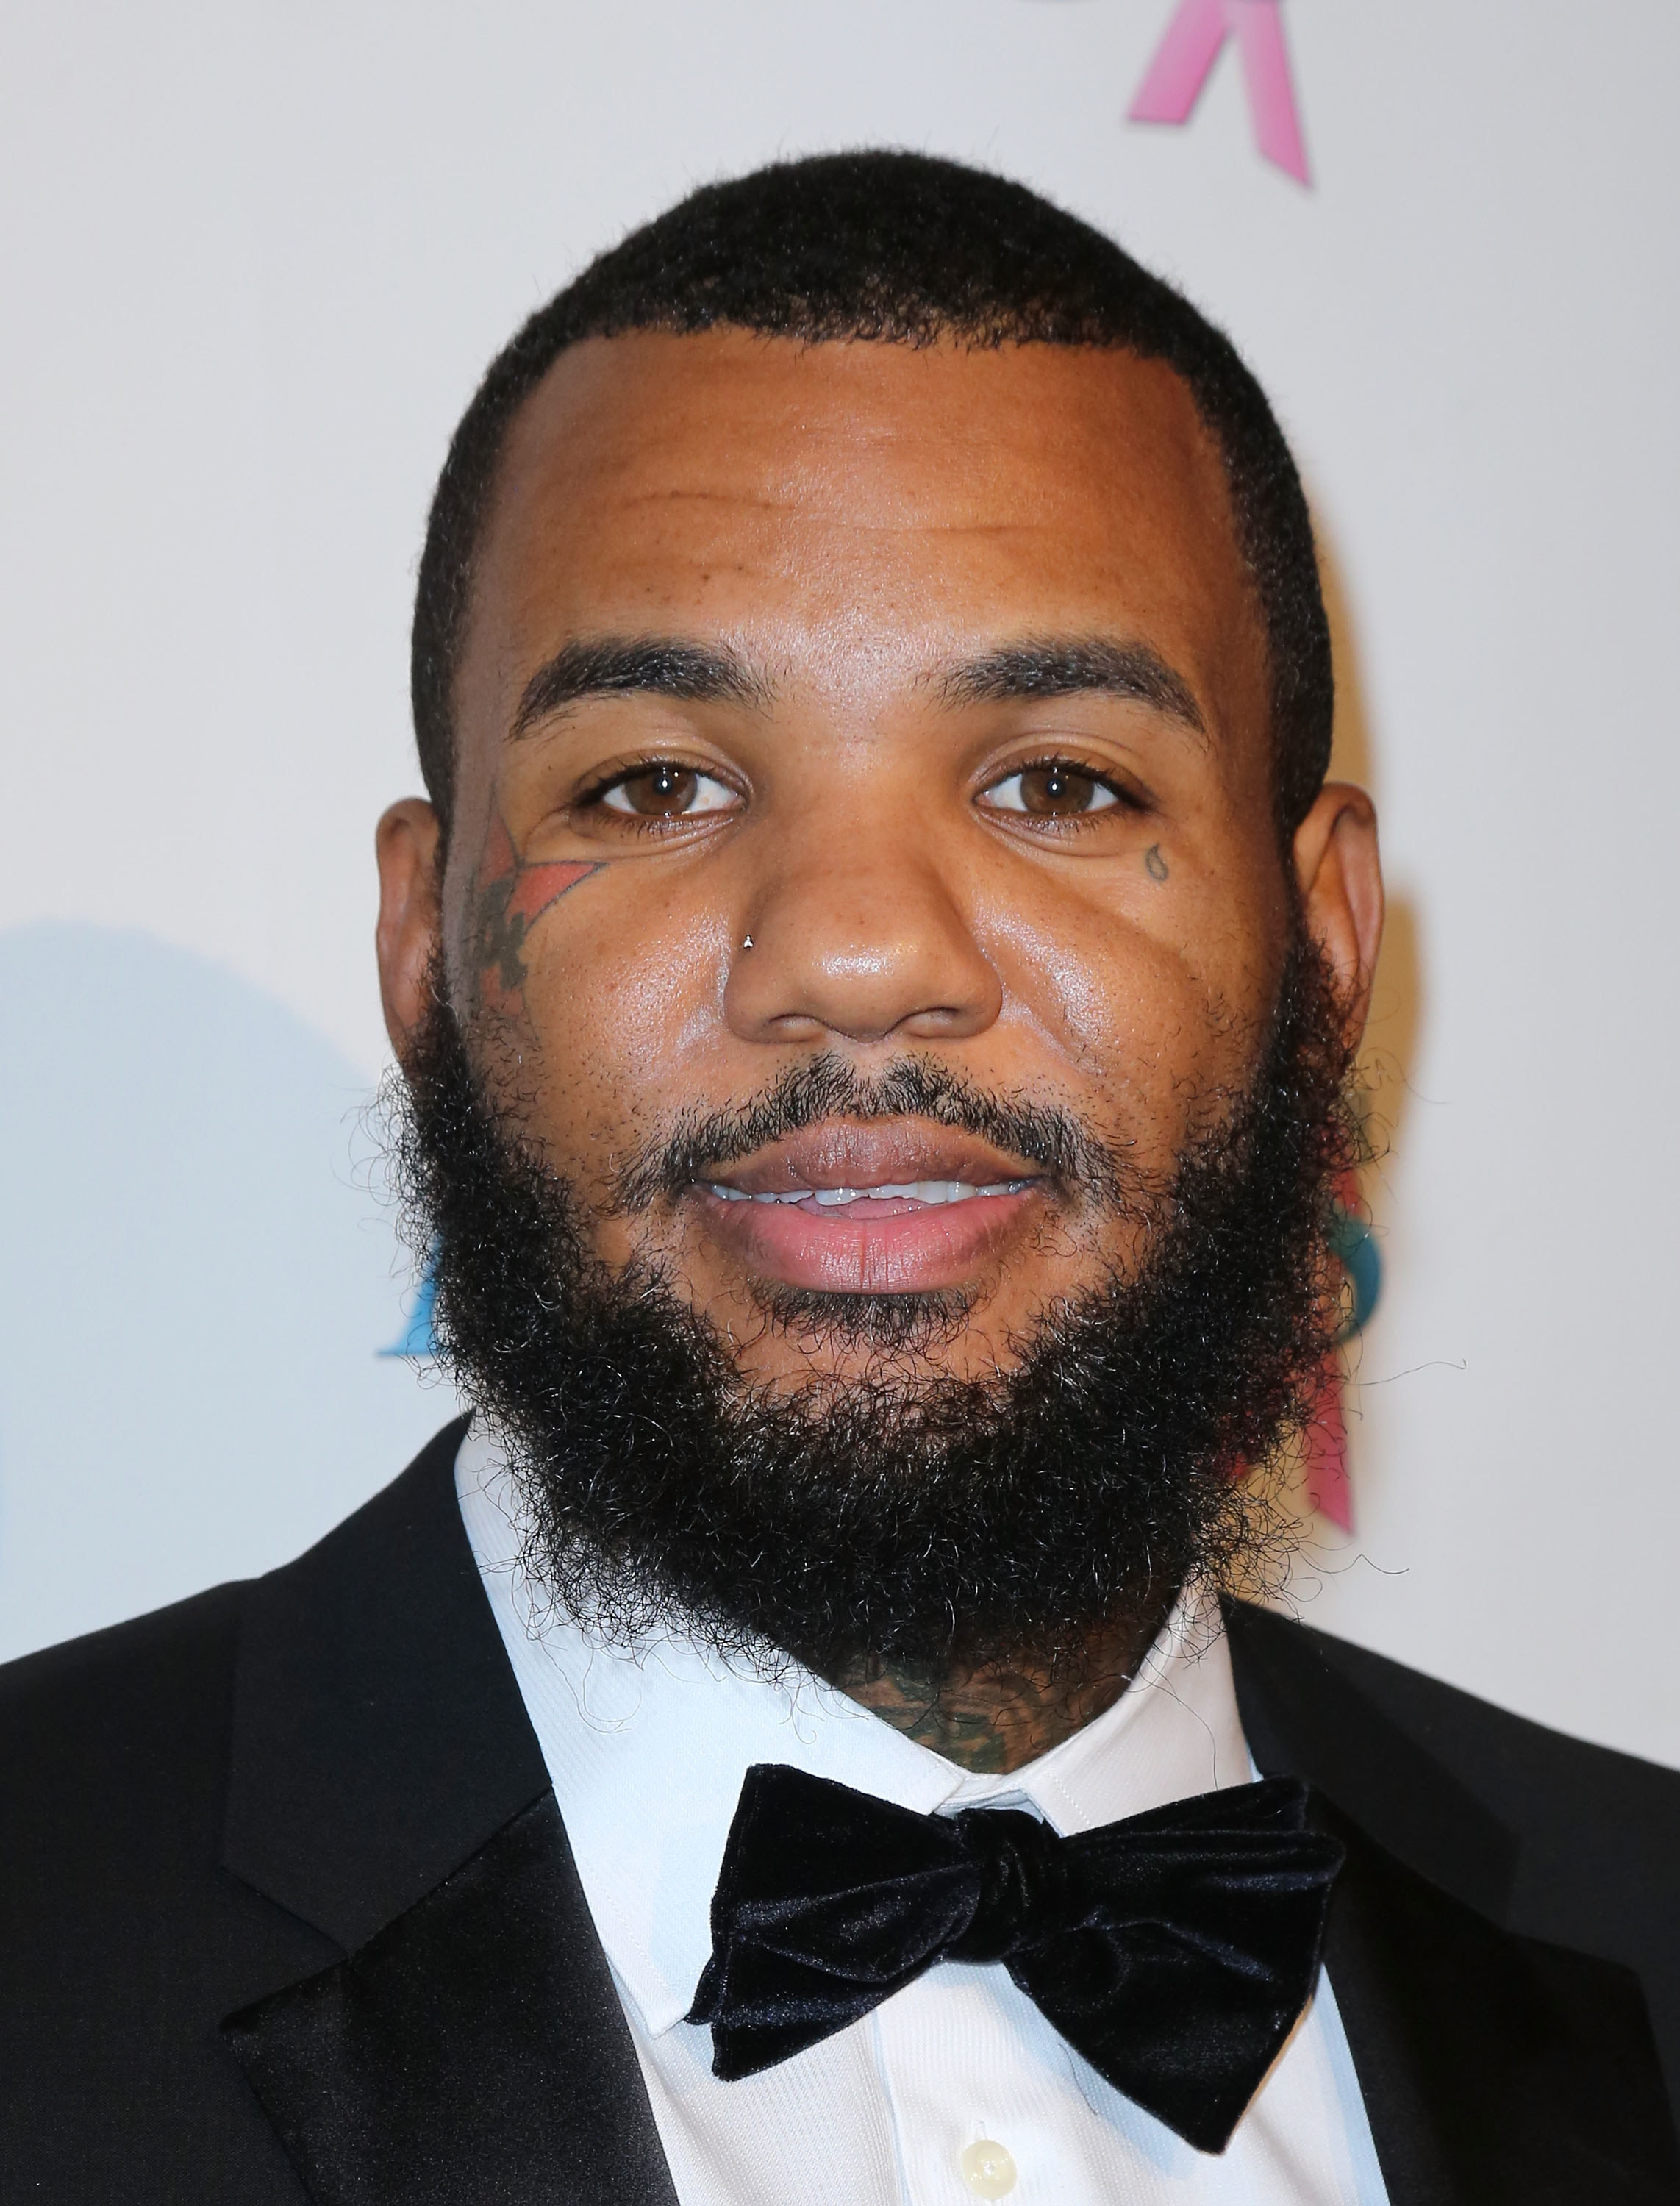 This Is What The Game Had To Say About His 12-Year-Old Daughter’s Controversial Dress After His Instagram Post Sparked Backlash